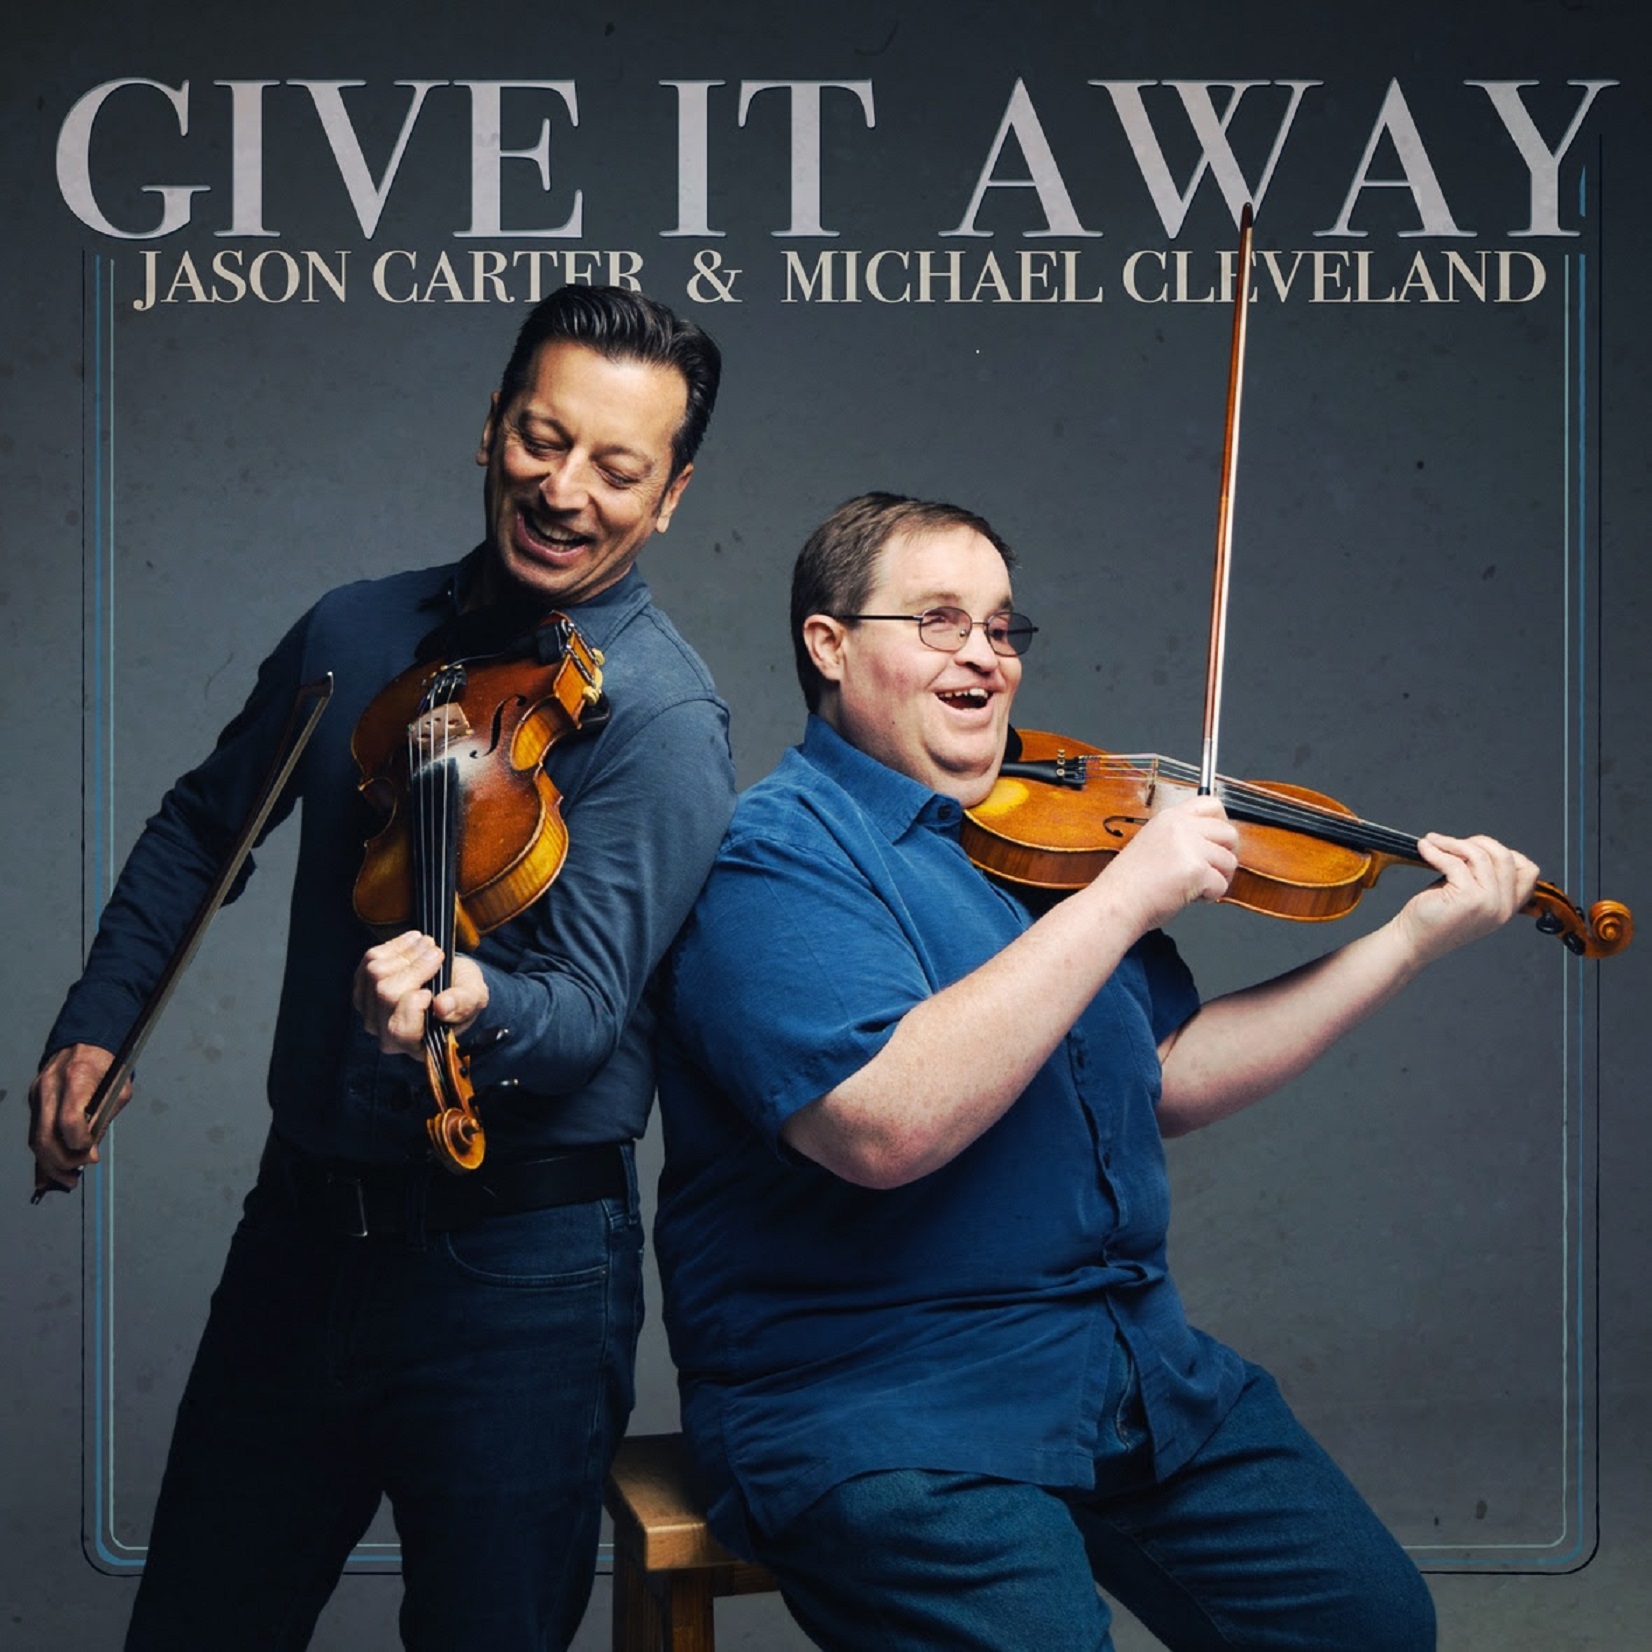 Jason Carter and Michael Cleveland Share Sneak Peek of Forthcoming Album with First Single - "Give It Away"